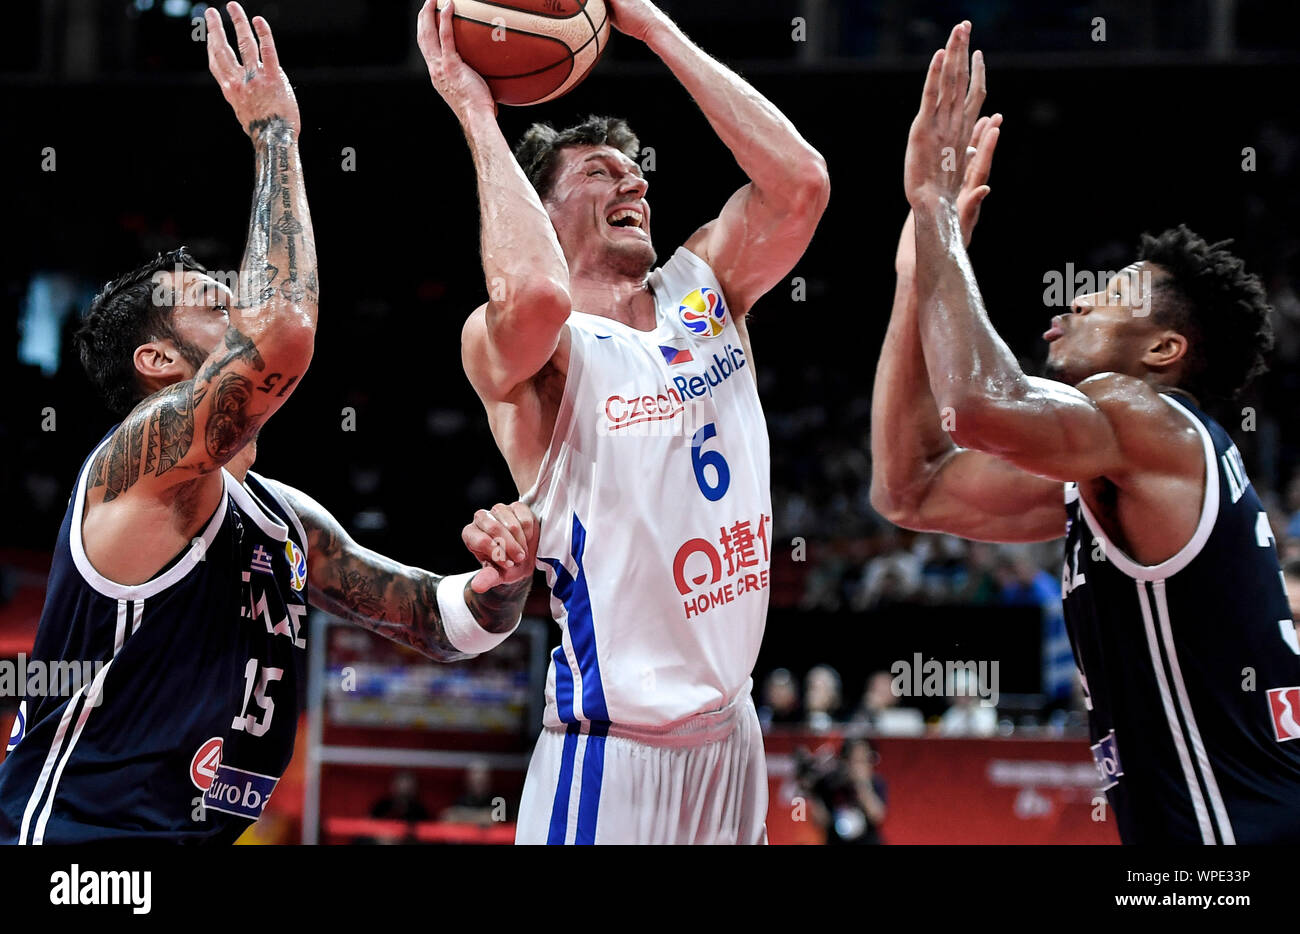 190909) -- SHENZHEN, Sept. 9, 2019 (Xinhua) -- Pavel Pumprla (C) of the  Czech Republic goes for a basket against Georgios Printezis (L) and Giannis  Antetokounmpo of Greece during the group K